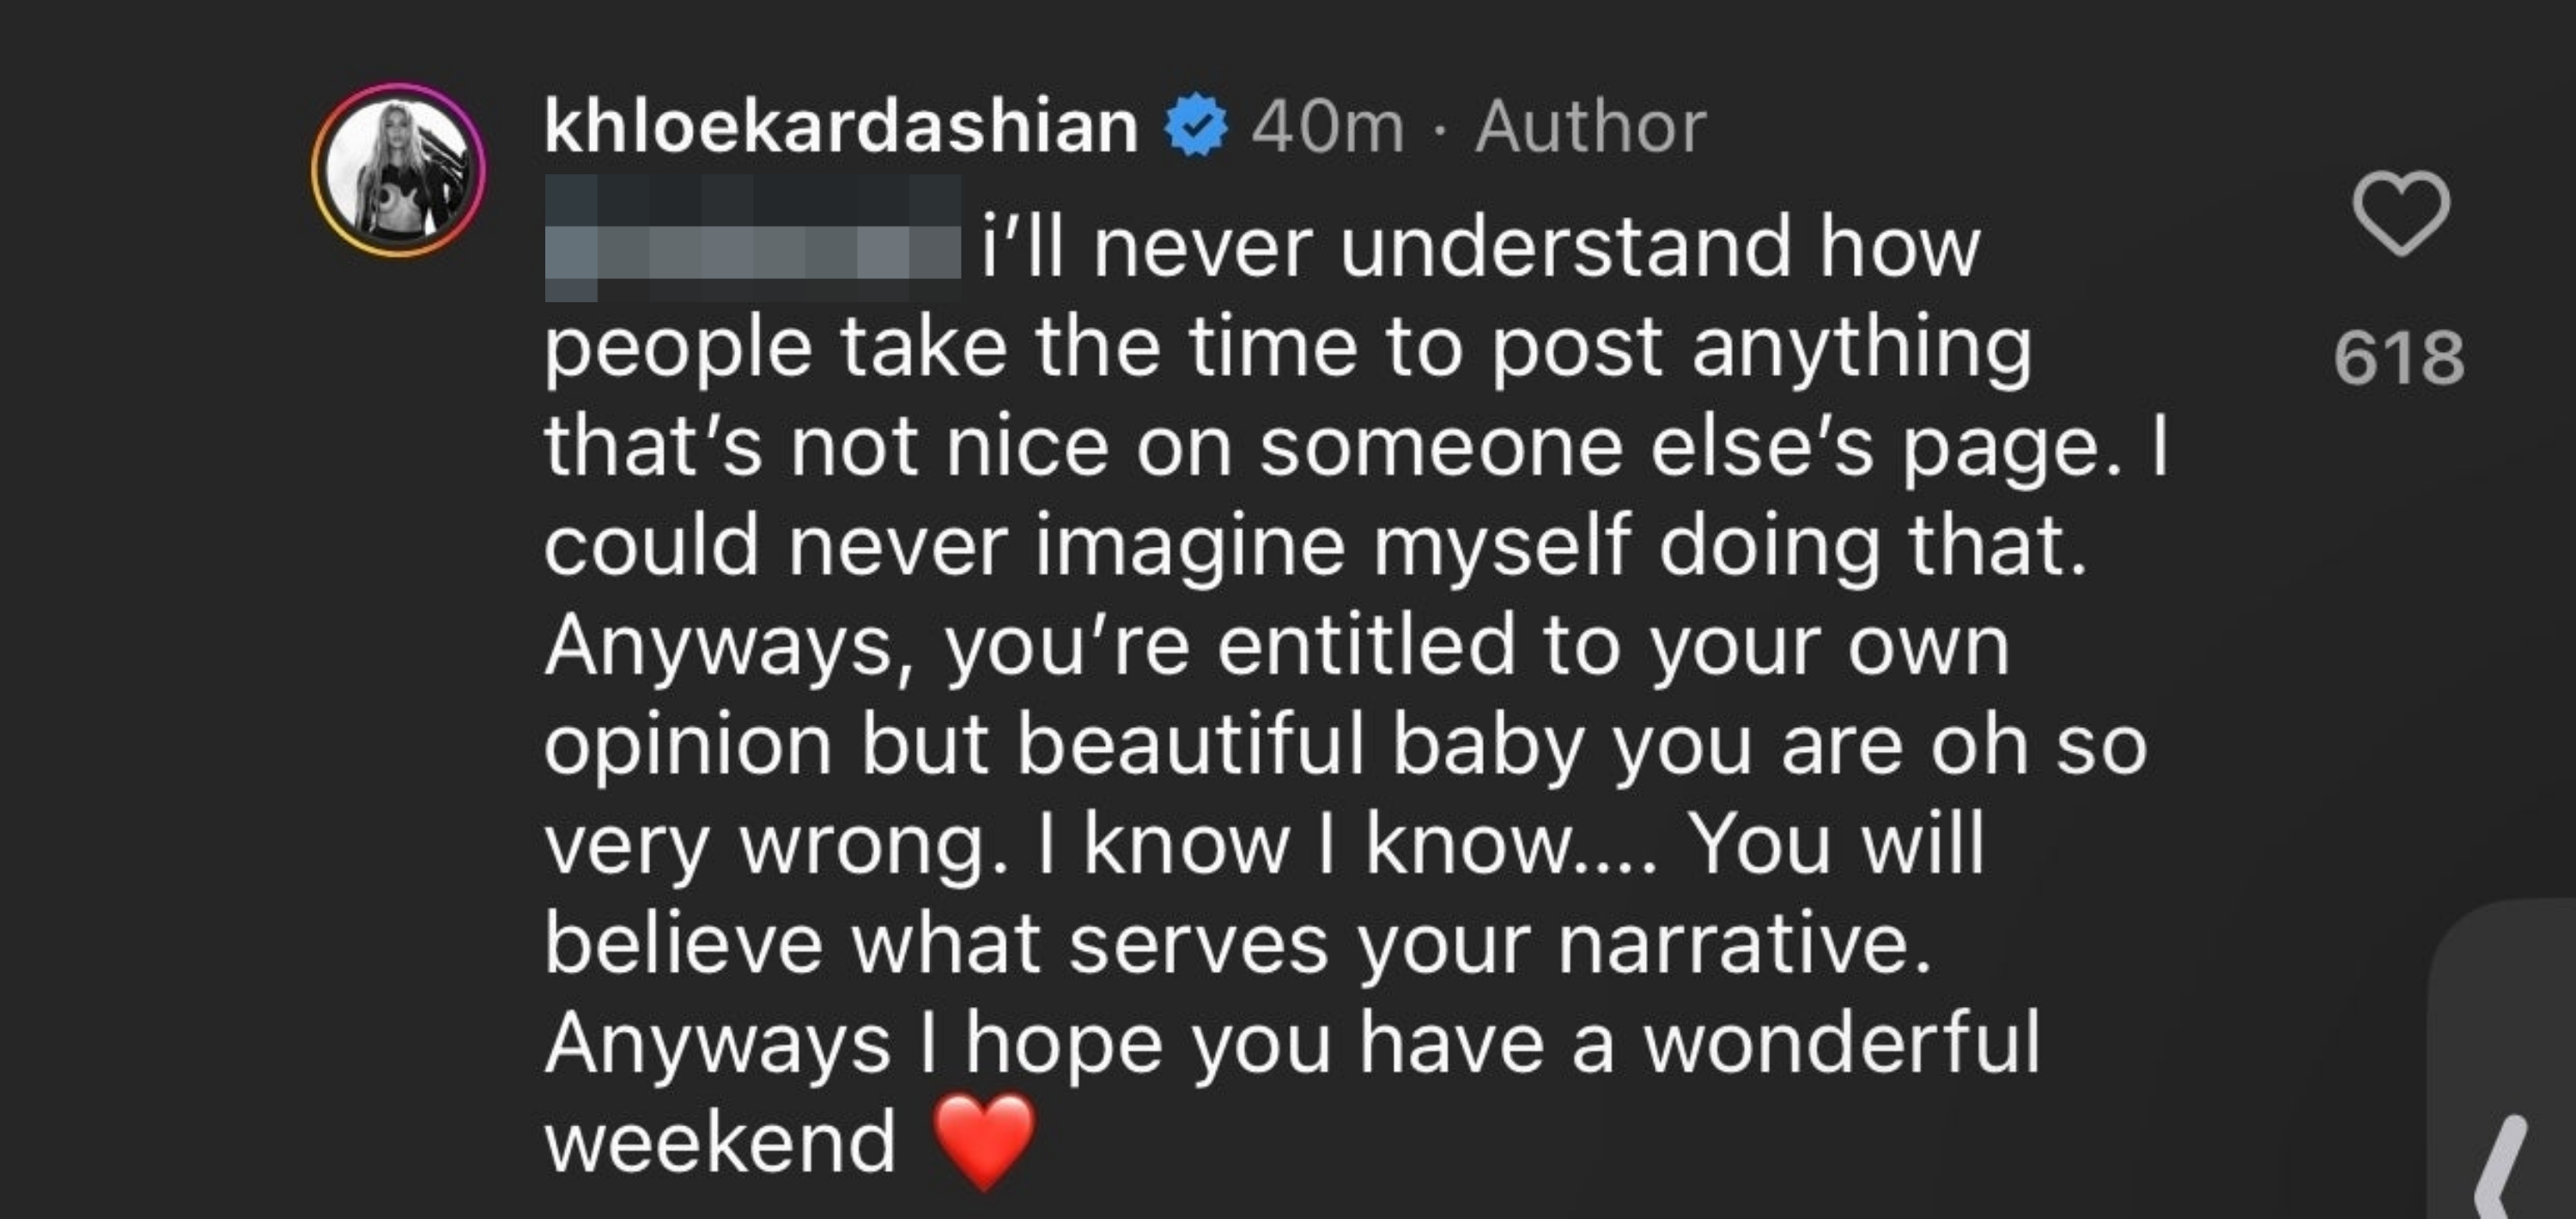 Khloe Kardashian responds to a comment on social media, defending her perspective and wishing the commenter a good weekend